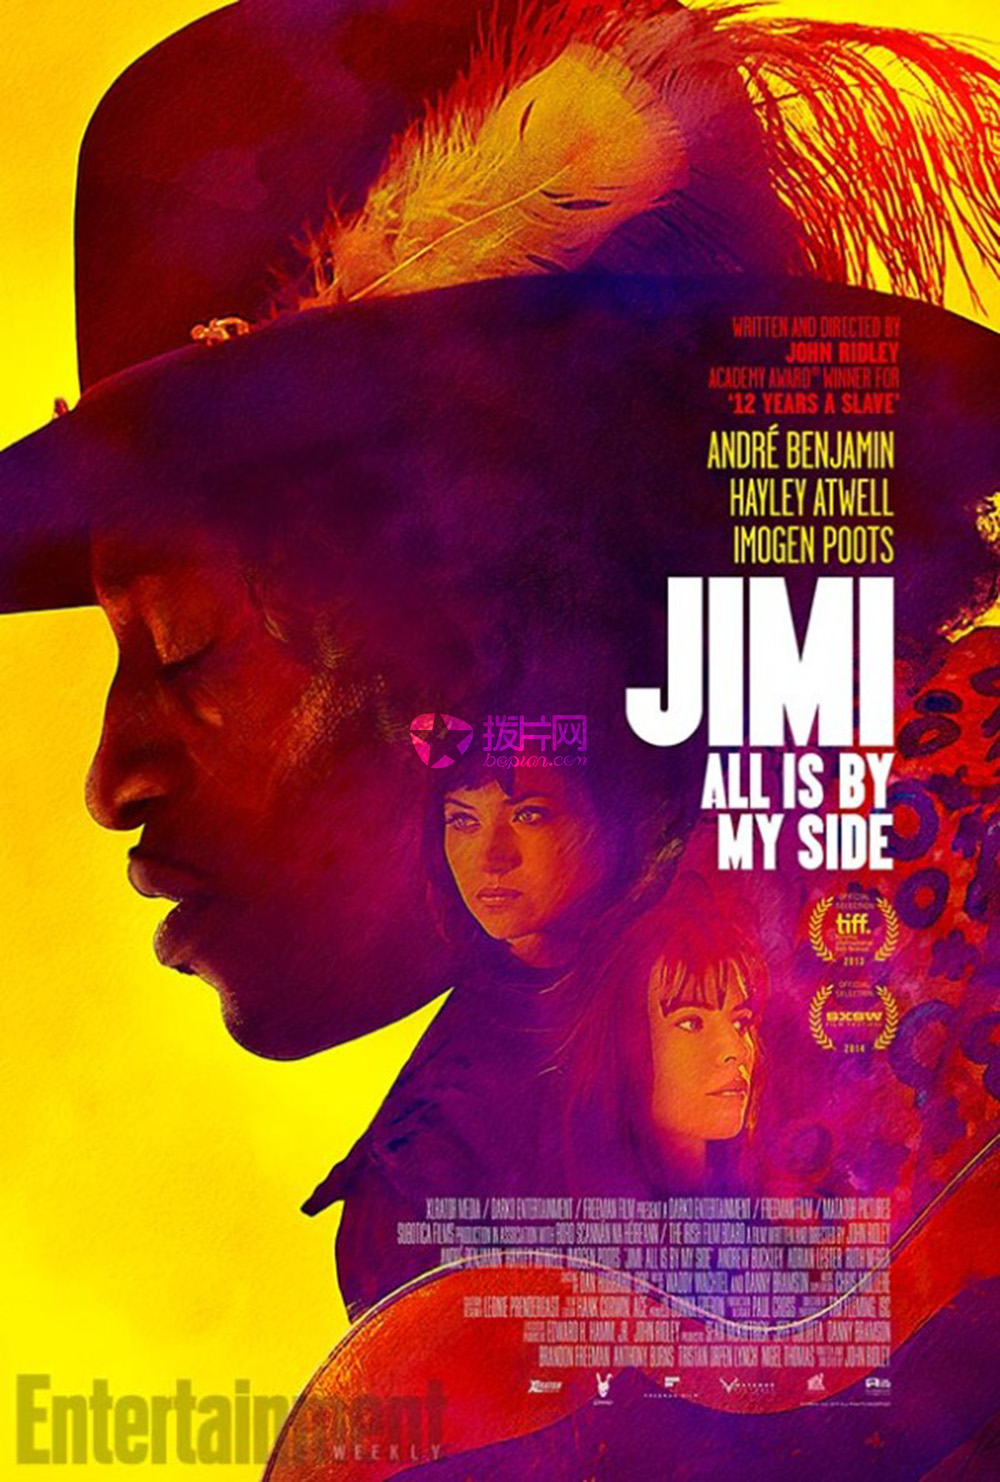 jimi-all-is-by-my-side-poster-600x889.jpg